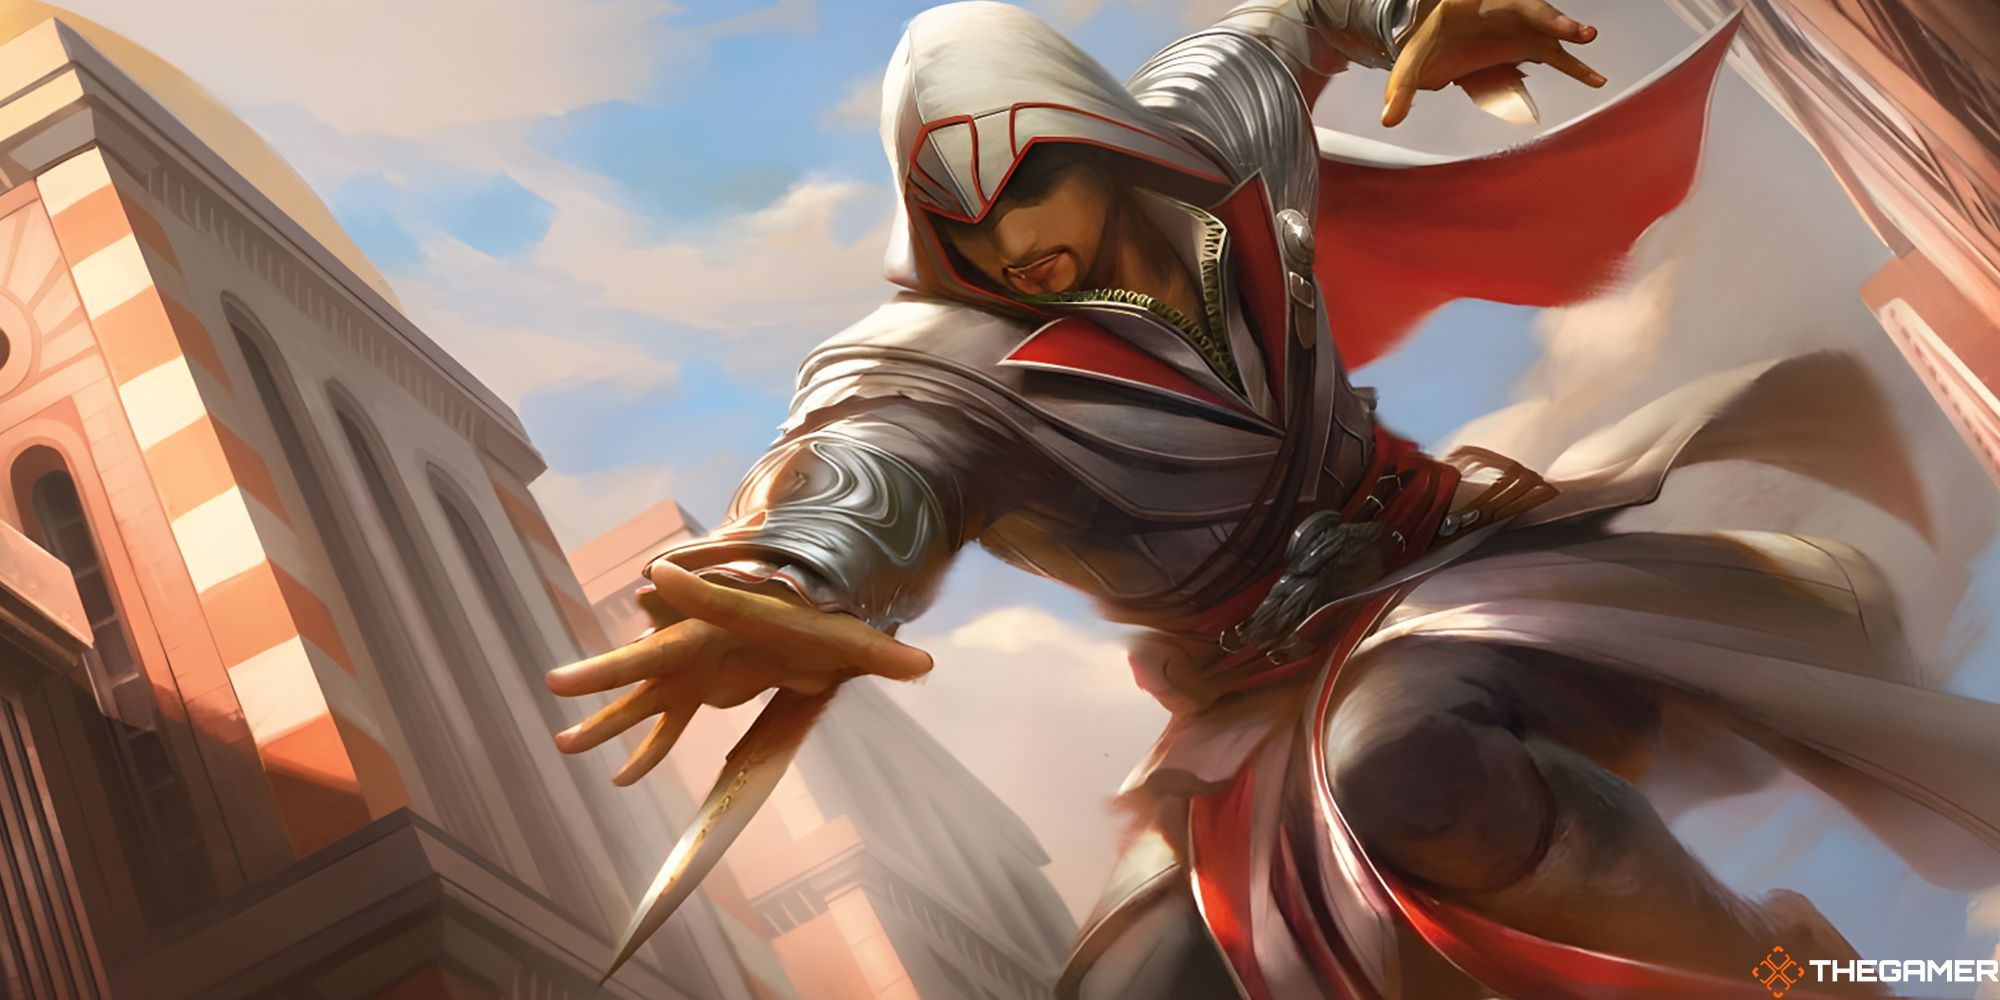 Magic: The Gathering's Assassin's Creed Crossover Set Is Launching